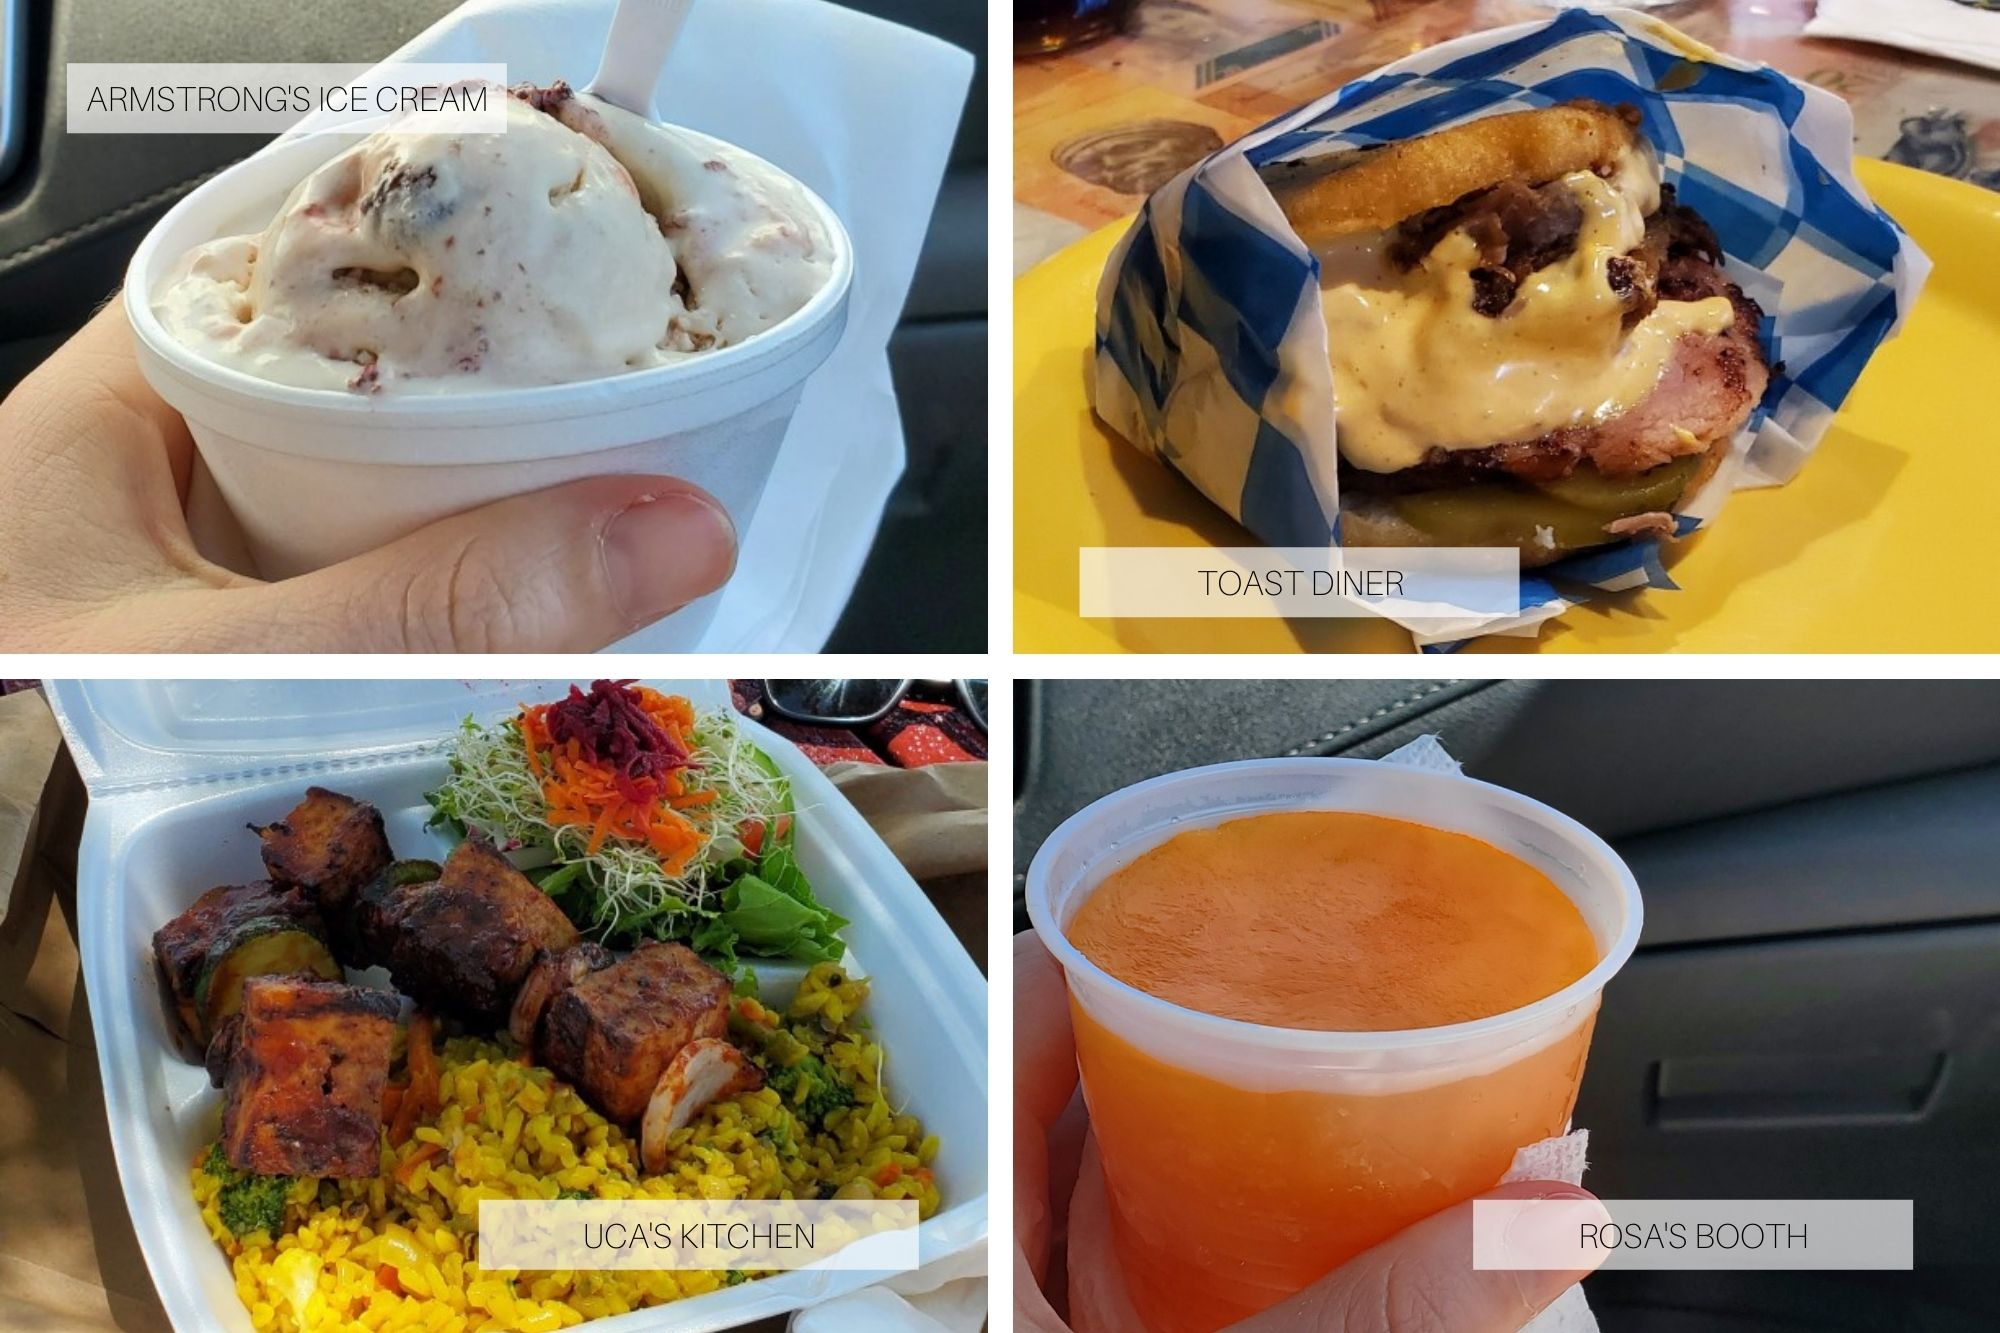 A cup of ice cream; an arepa with fillings; an orange ice pop in a plastic cup; a tray of rice with tofu and salad